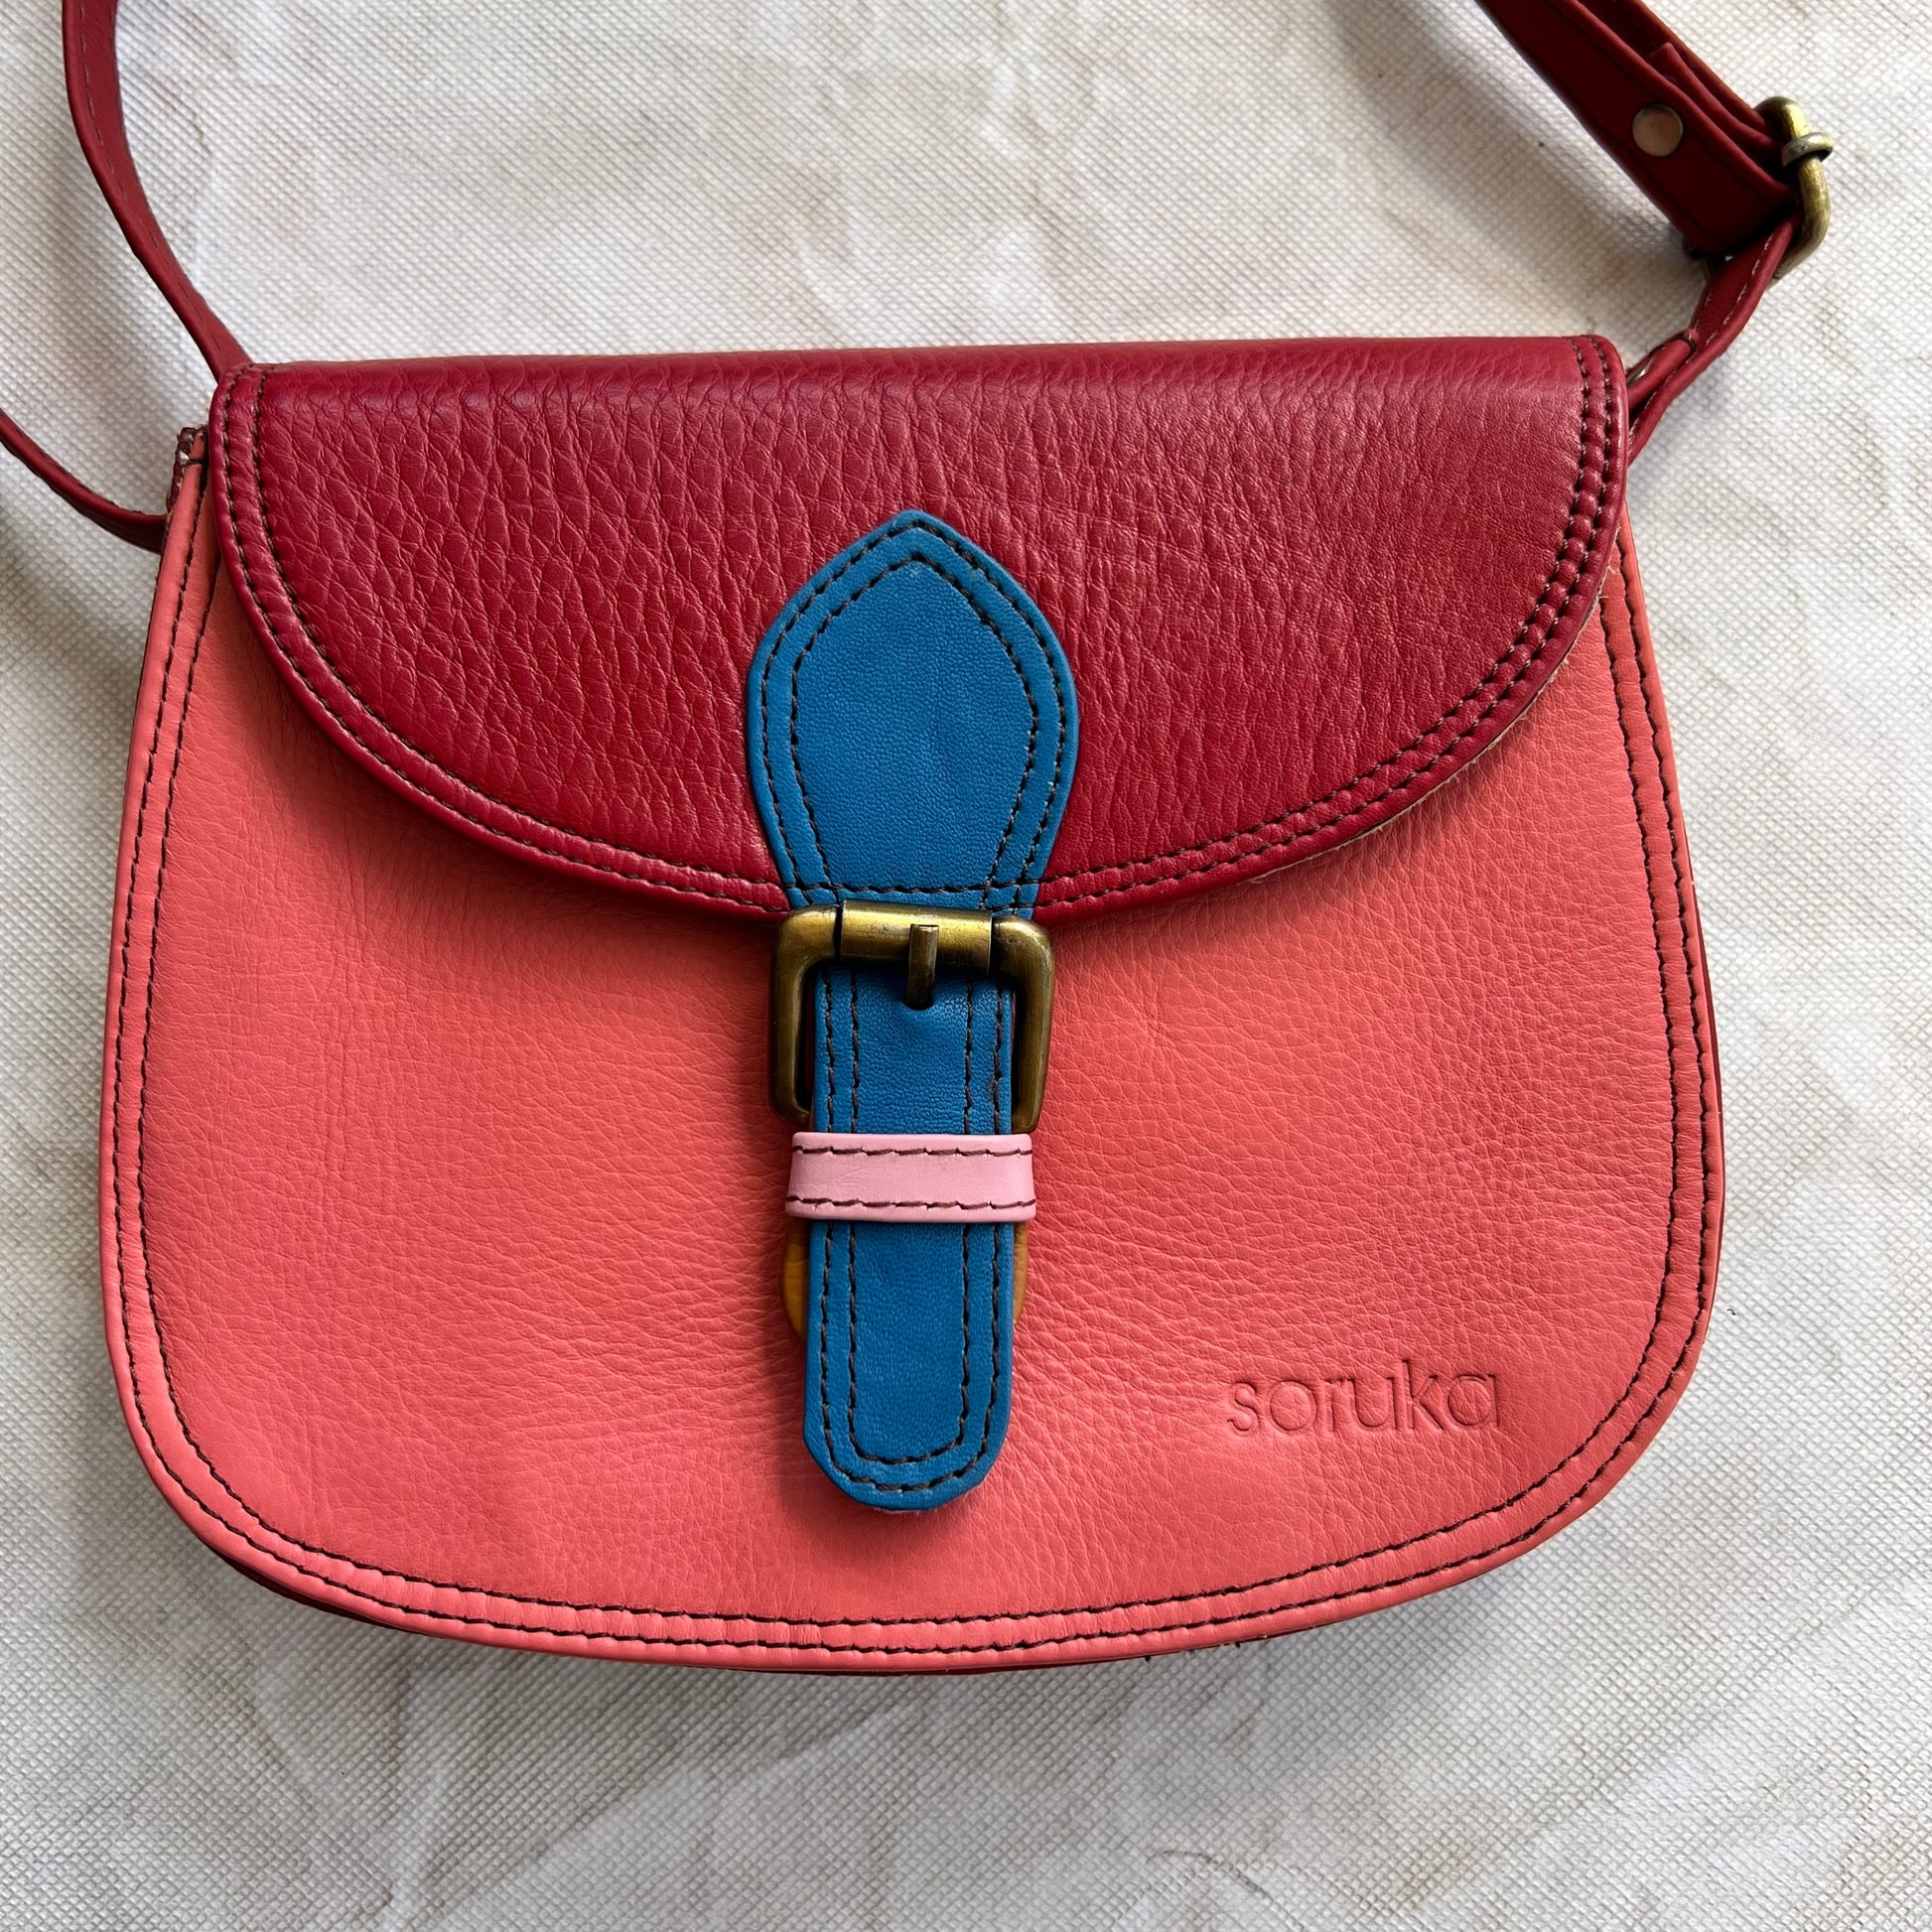 Rounded coral bag with red flap and blue buckle.